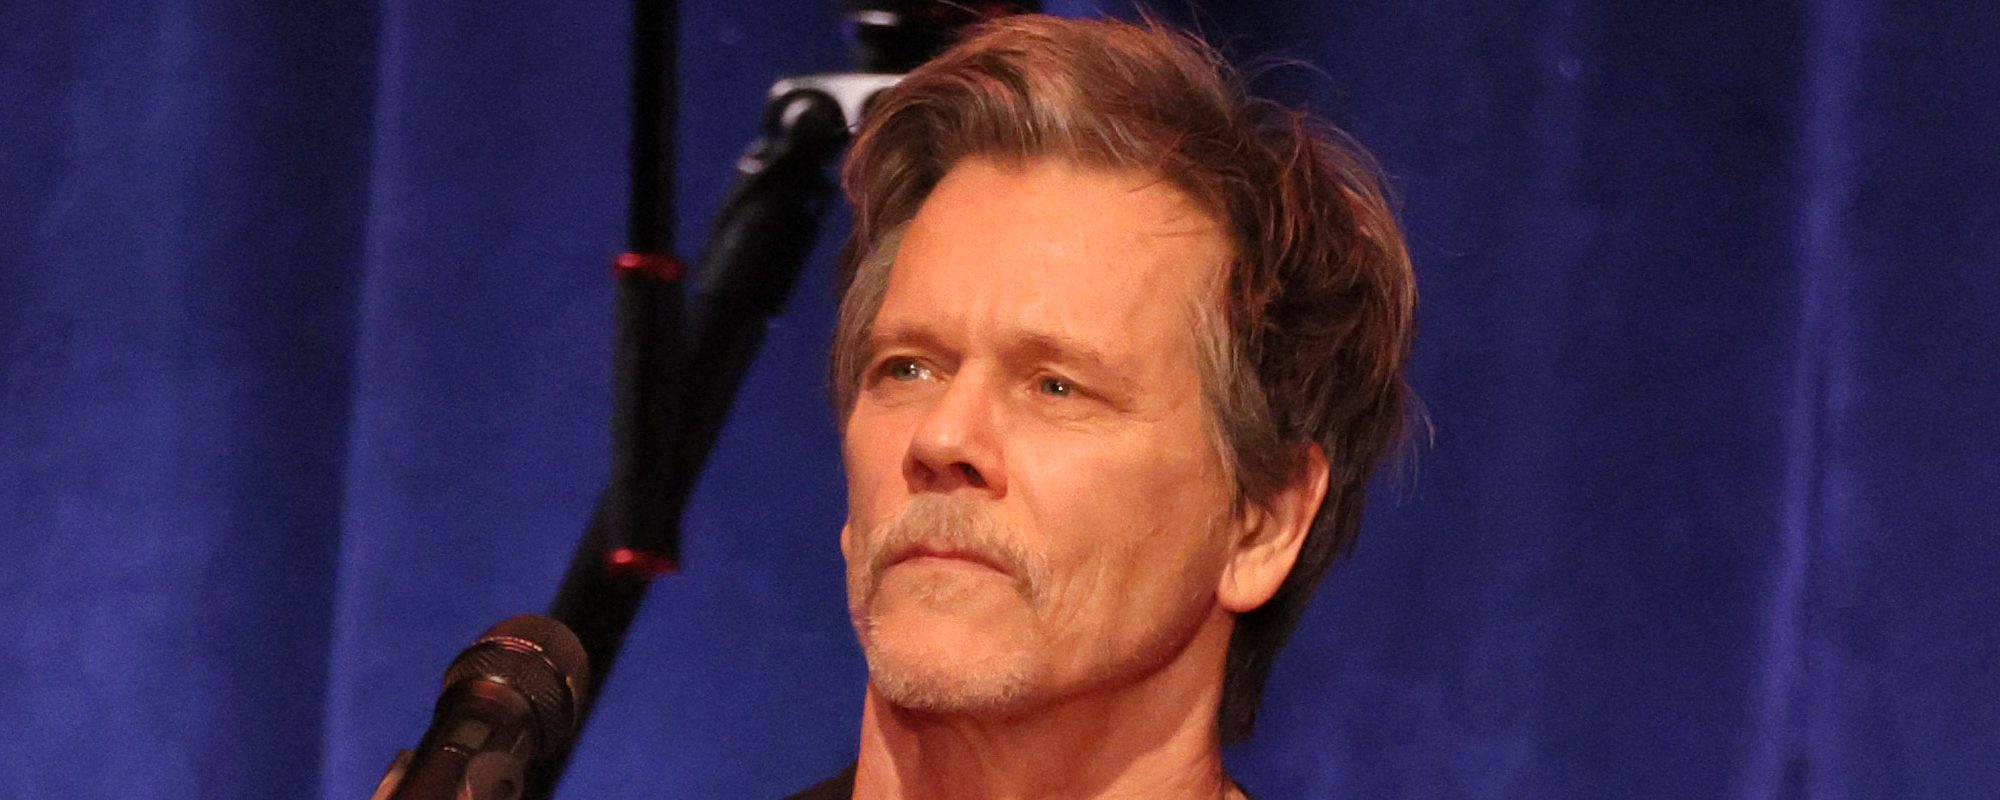 Kevin Bacon & His Daughter Switch up Lyrics to Beyoncé’s “II Most Wanted” in Duet Performance